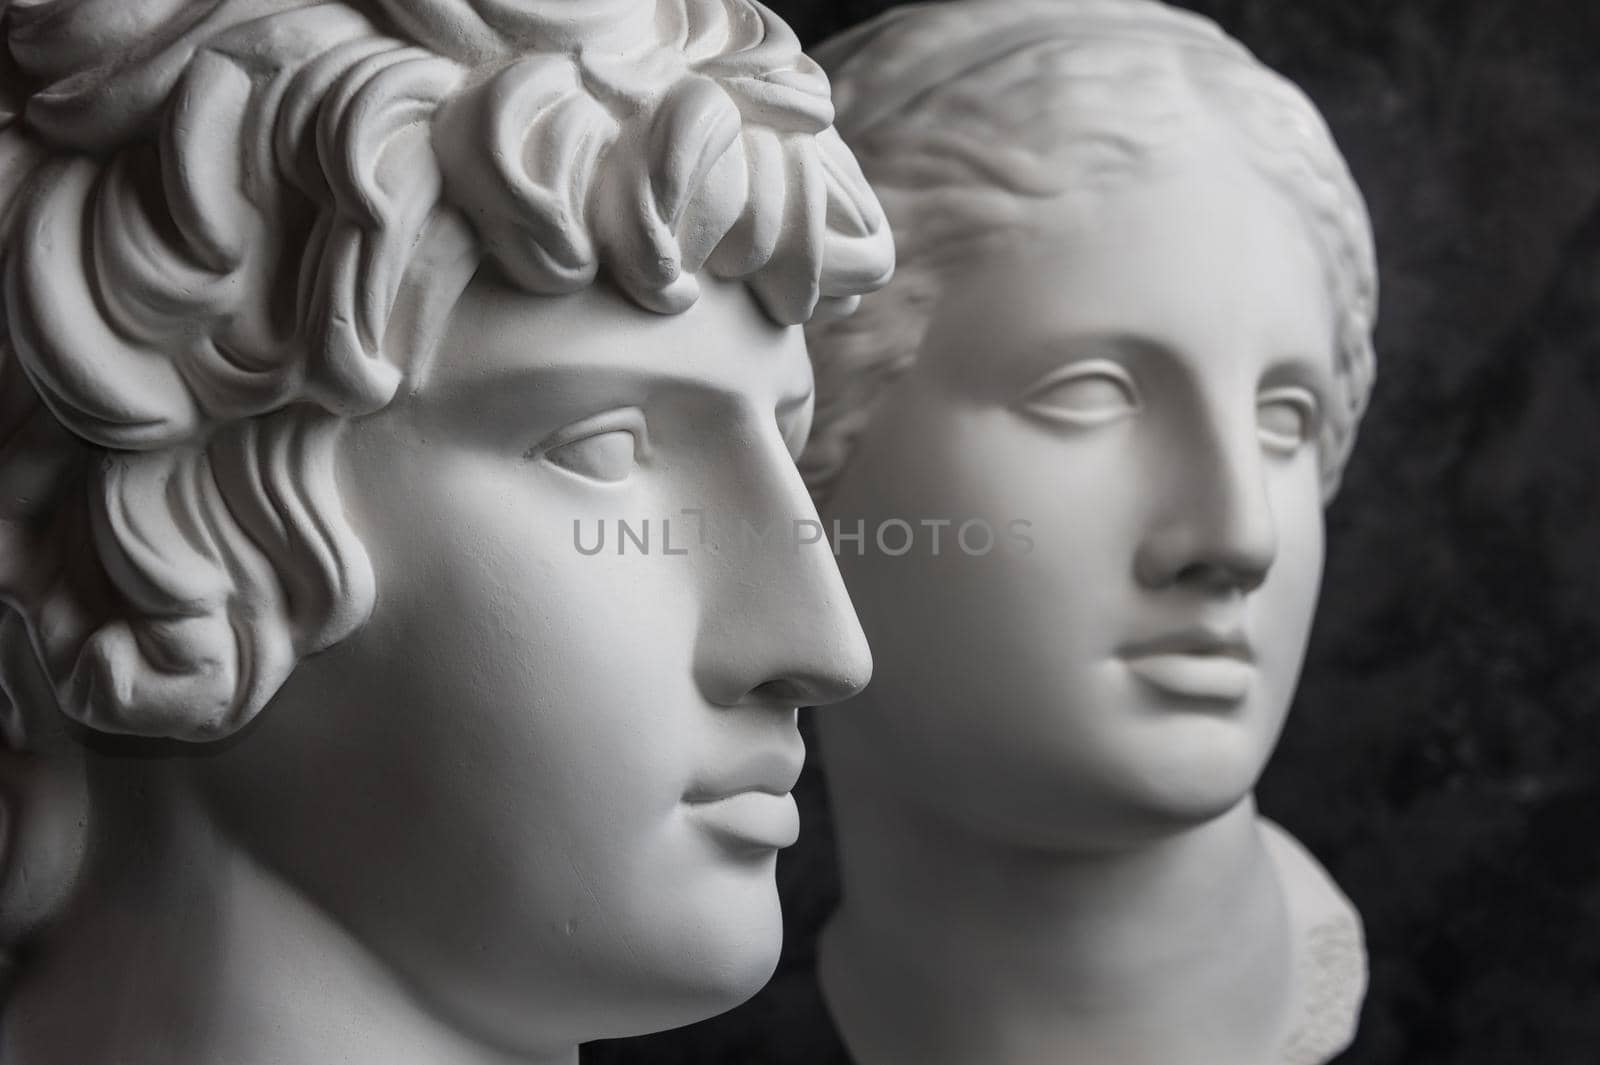 White gypsum copy of ancient statue of Antinous and Venus head for artists on a dark textured background. Plaster sculpture of statue face.